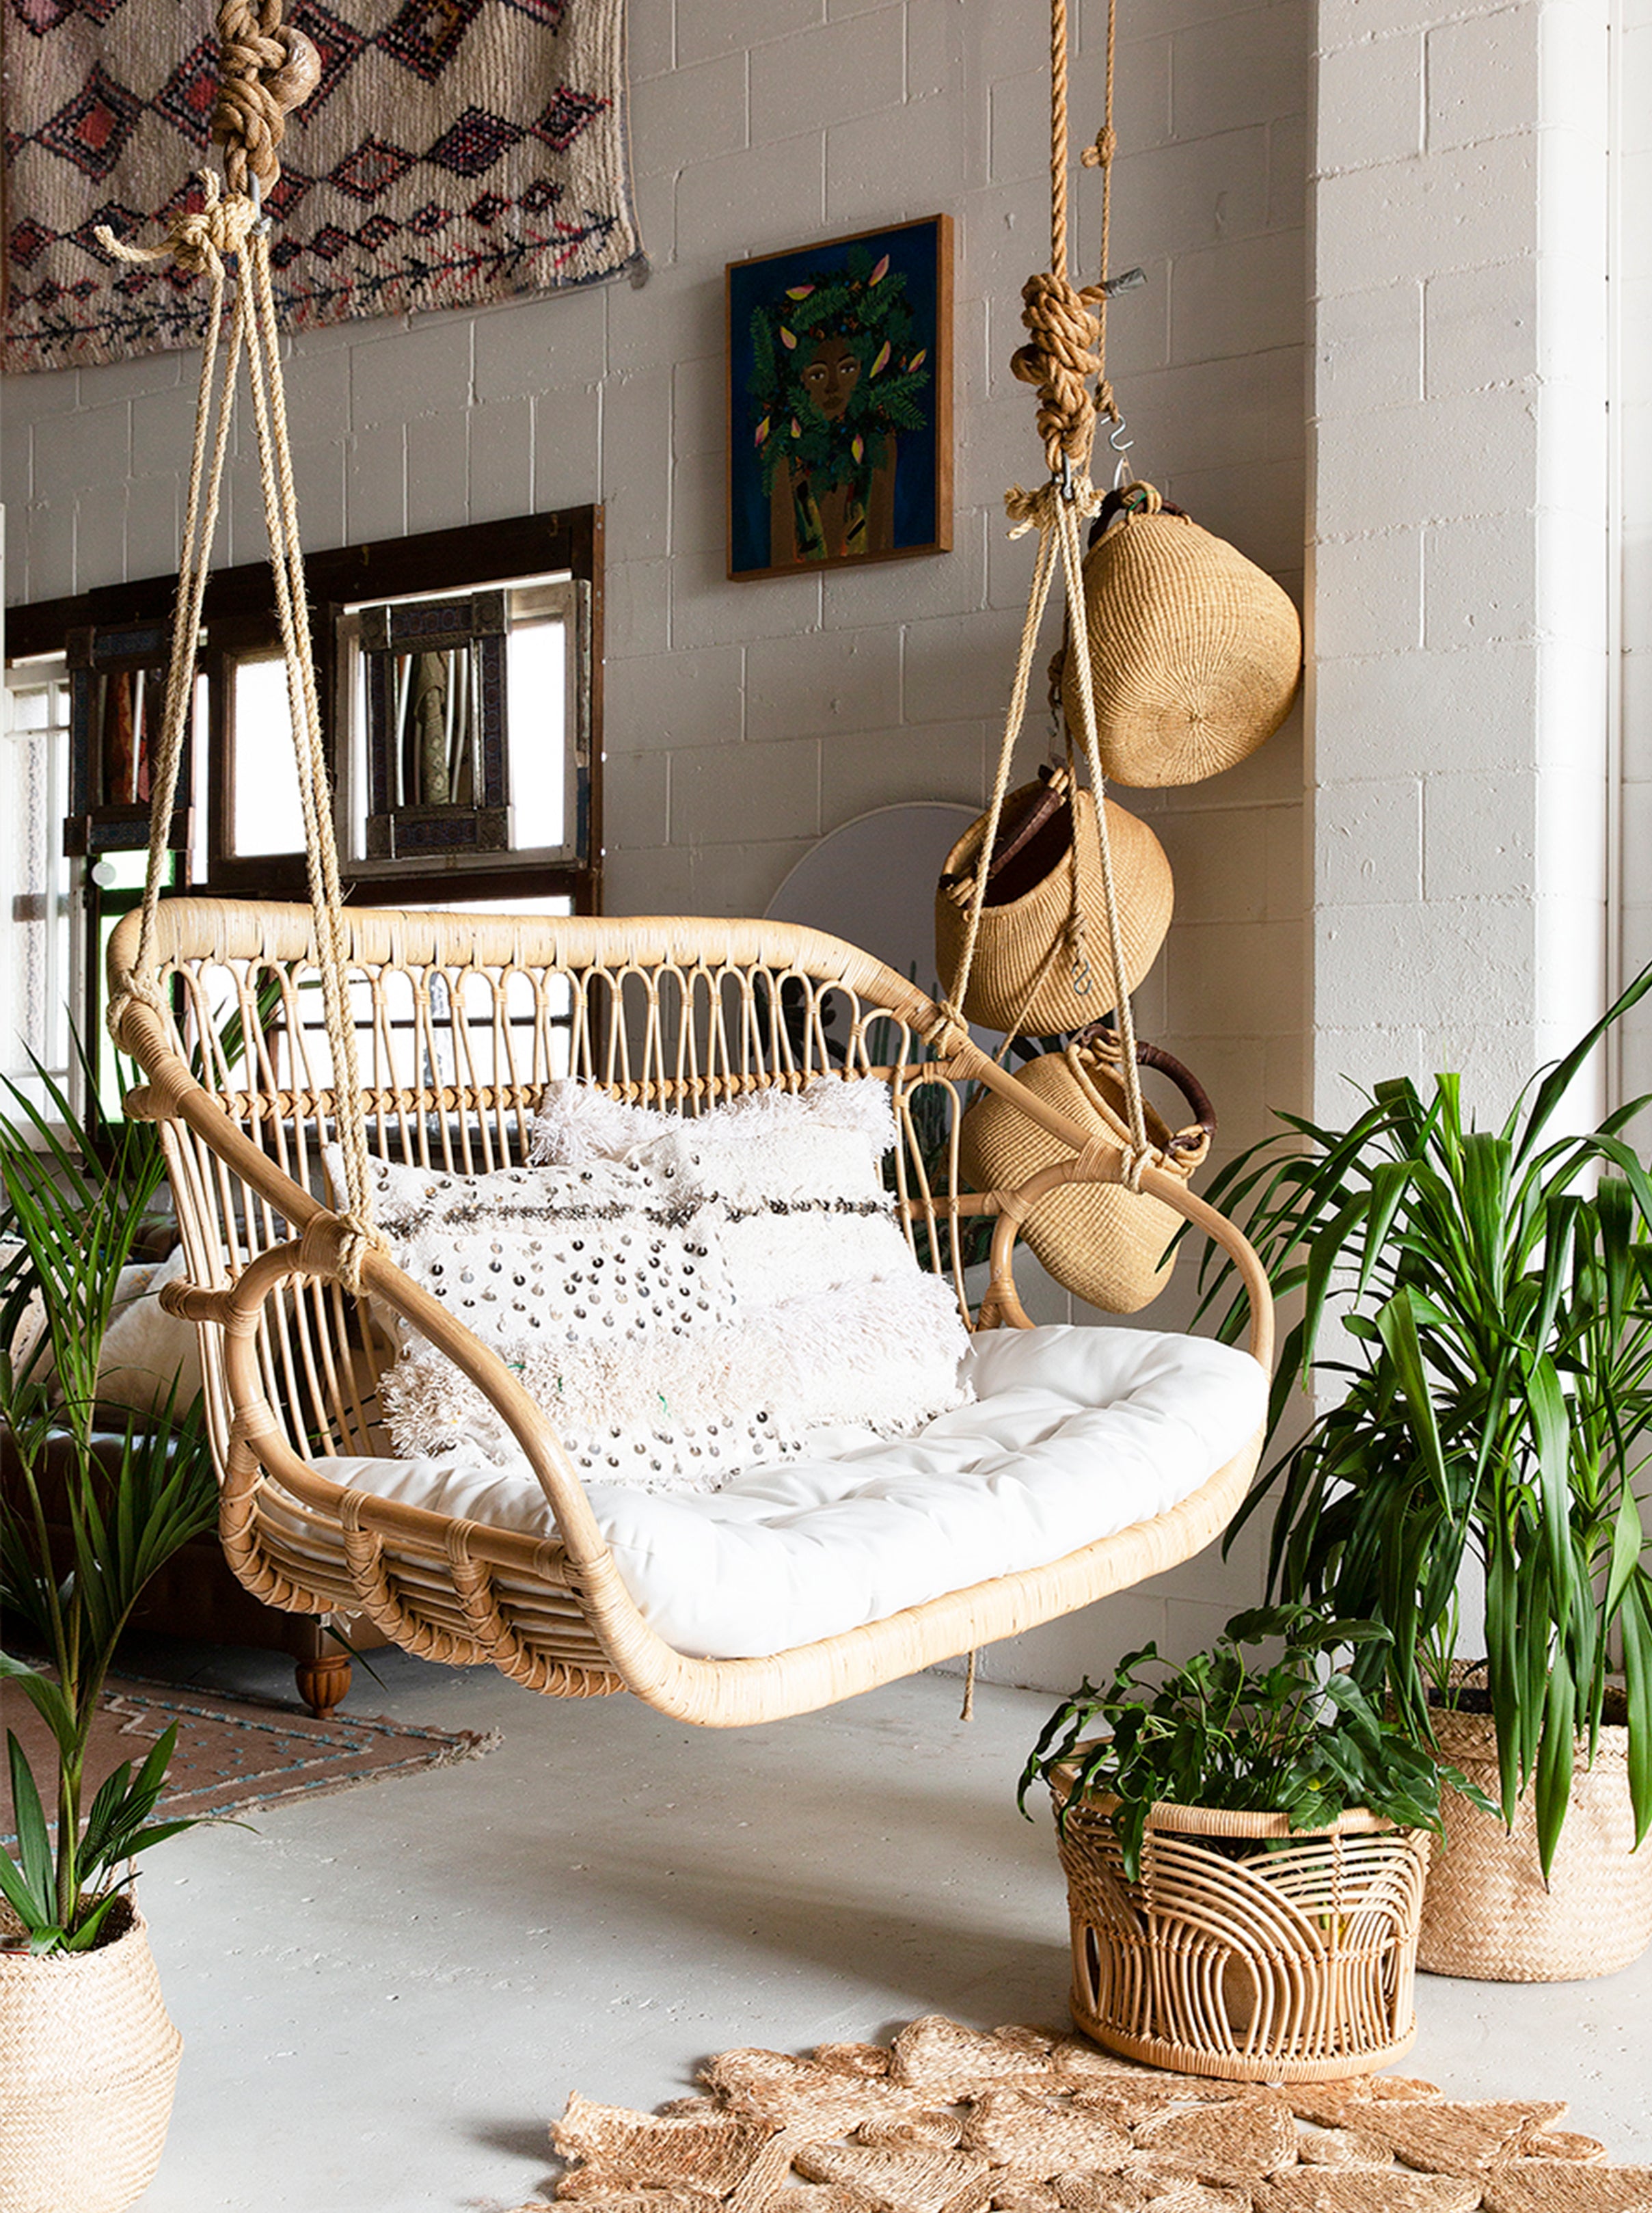 Dreamer Double Rattan Hanging Chair Due Late July Trader Trove